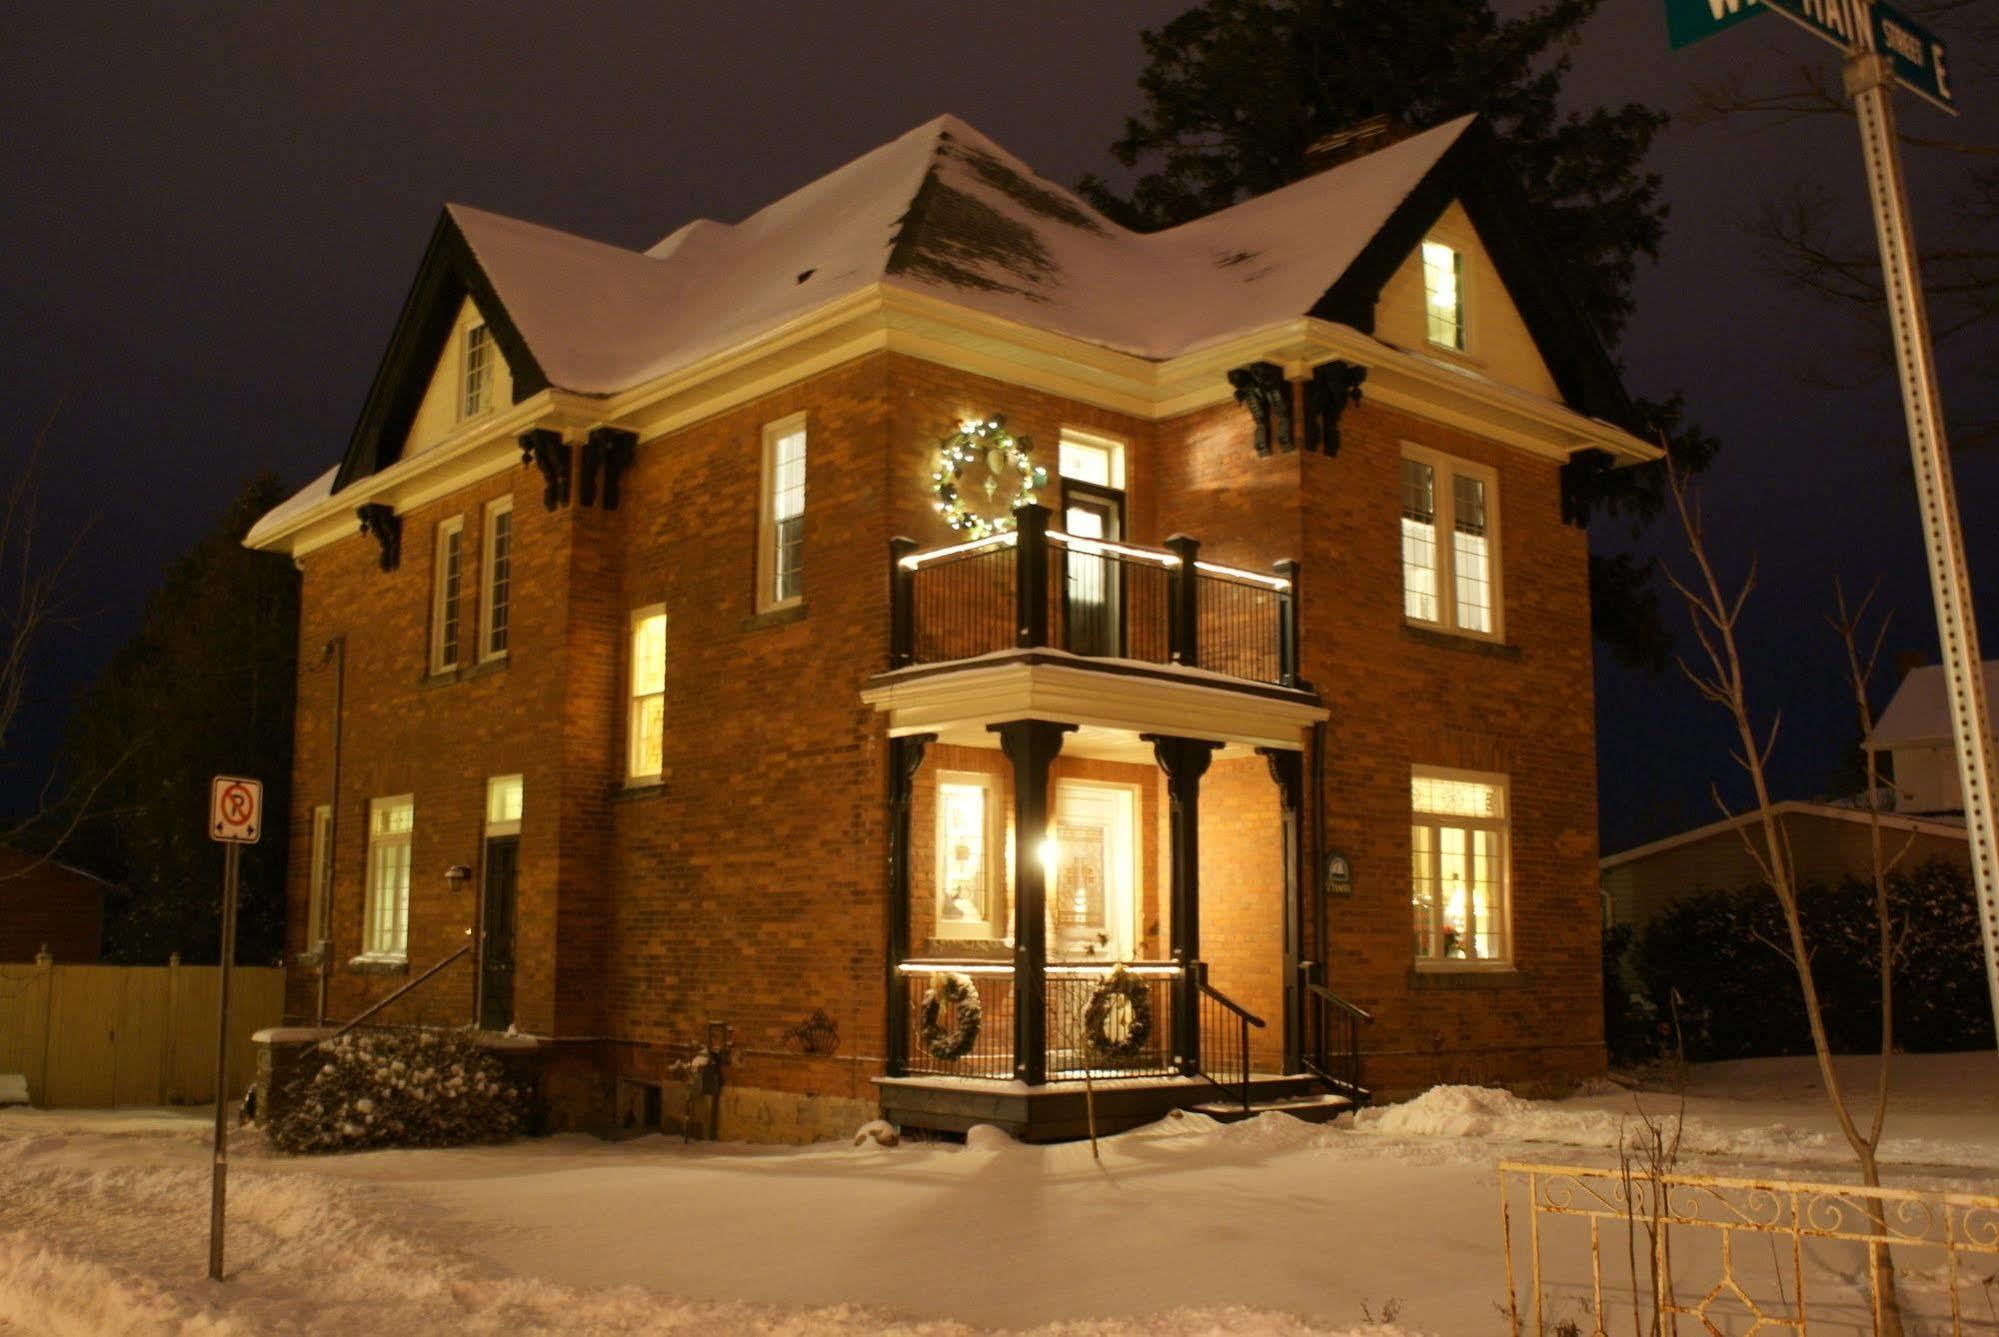 Bed and Breakfast Danby House Markdale Экстерьер фото